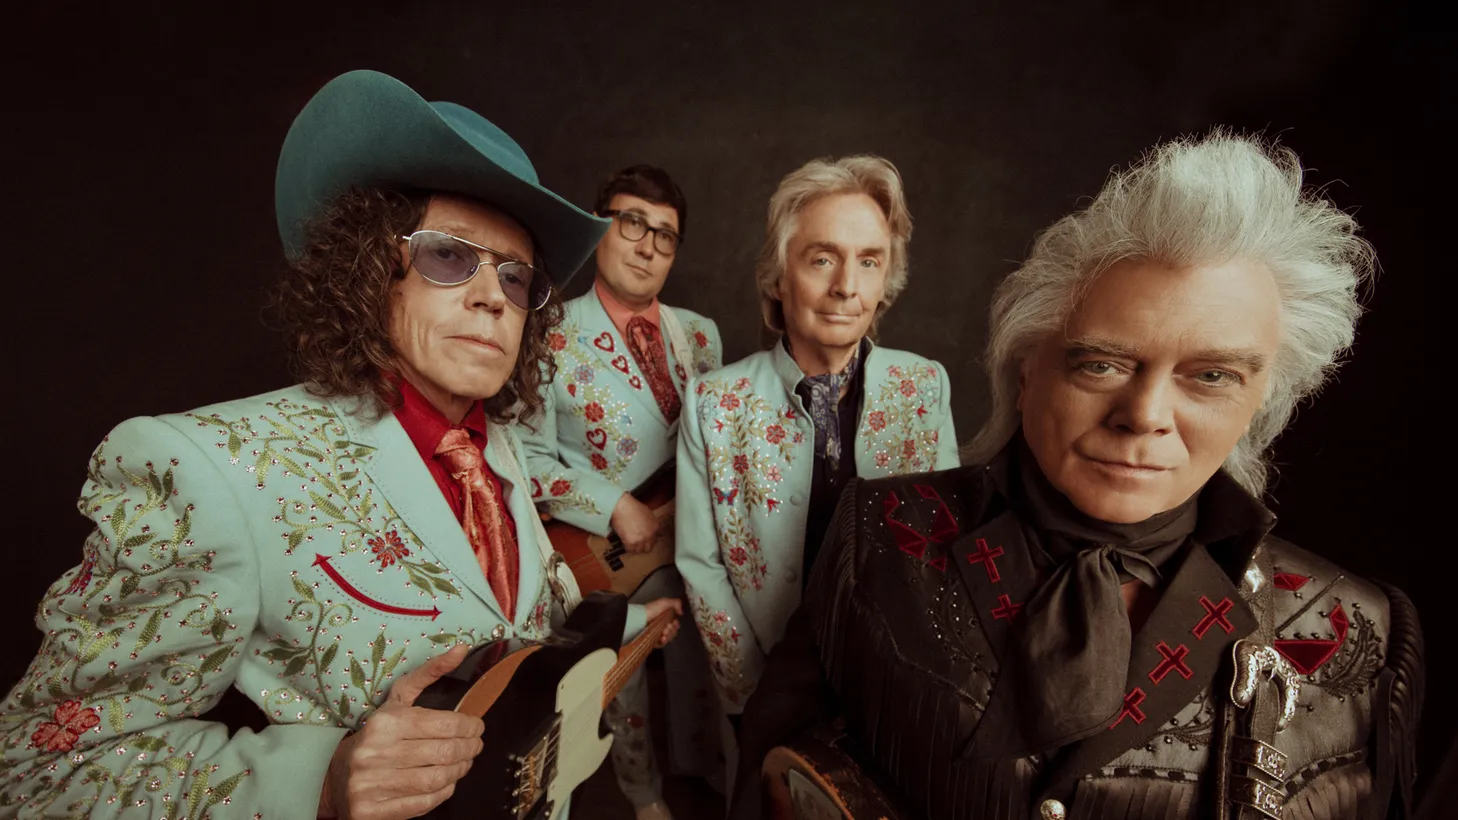 Five-time Grammy winner and newly-inducted Country Music Hall of Famer Marty Stuart celebrates five decades of merry music making with this reigning bluegrass rocker.